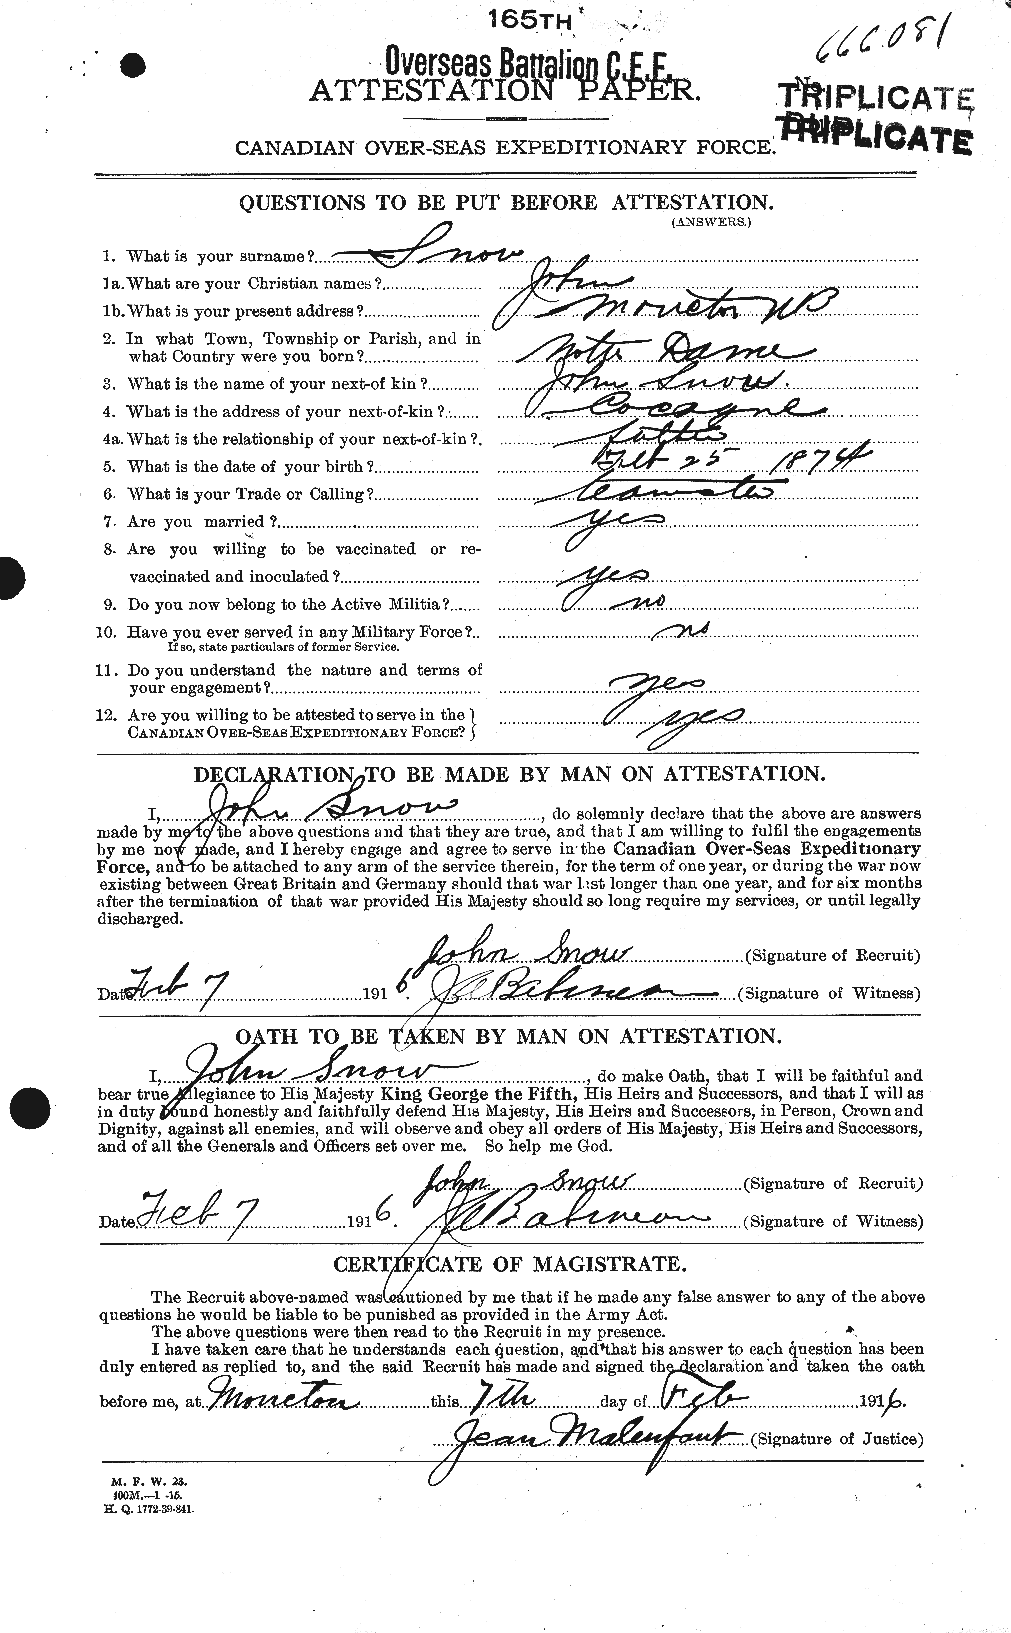 Personnel Records of the First World War - CEF 108948a